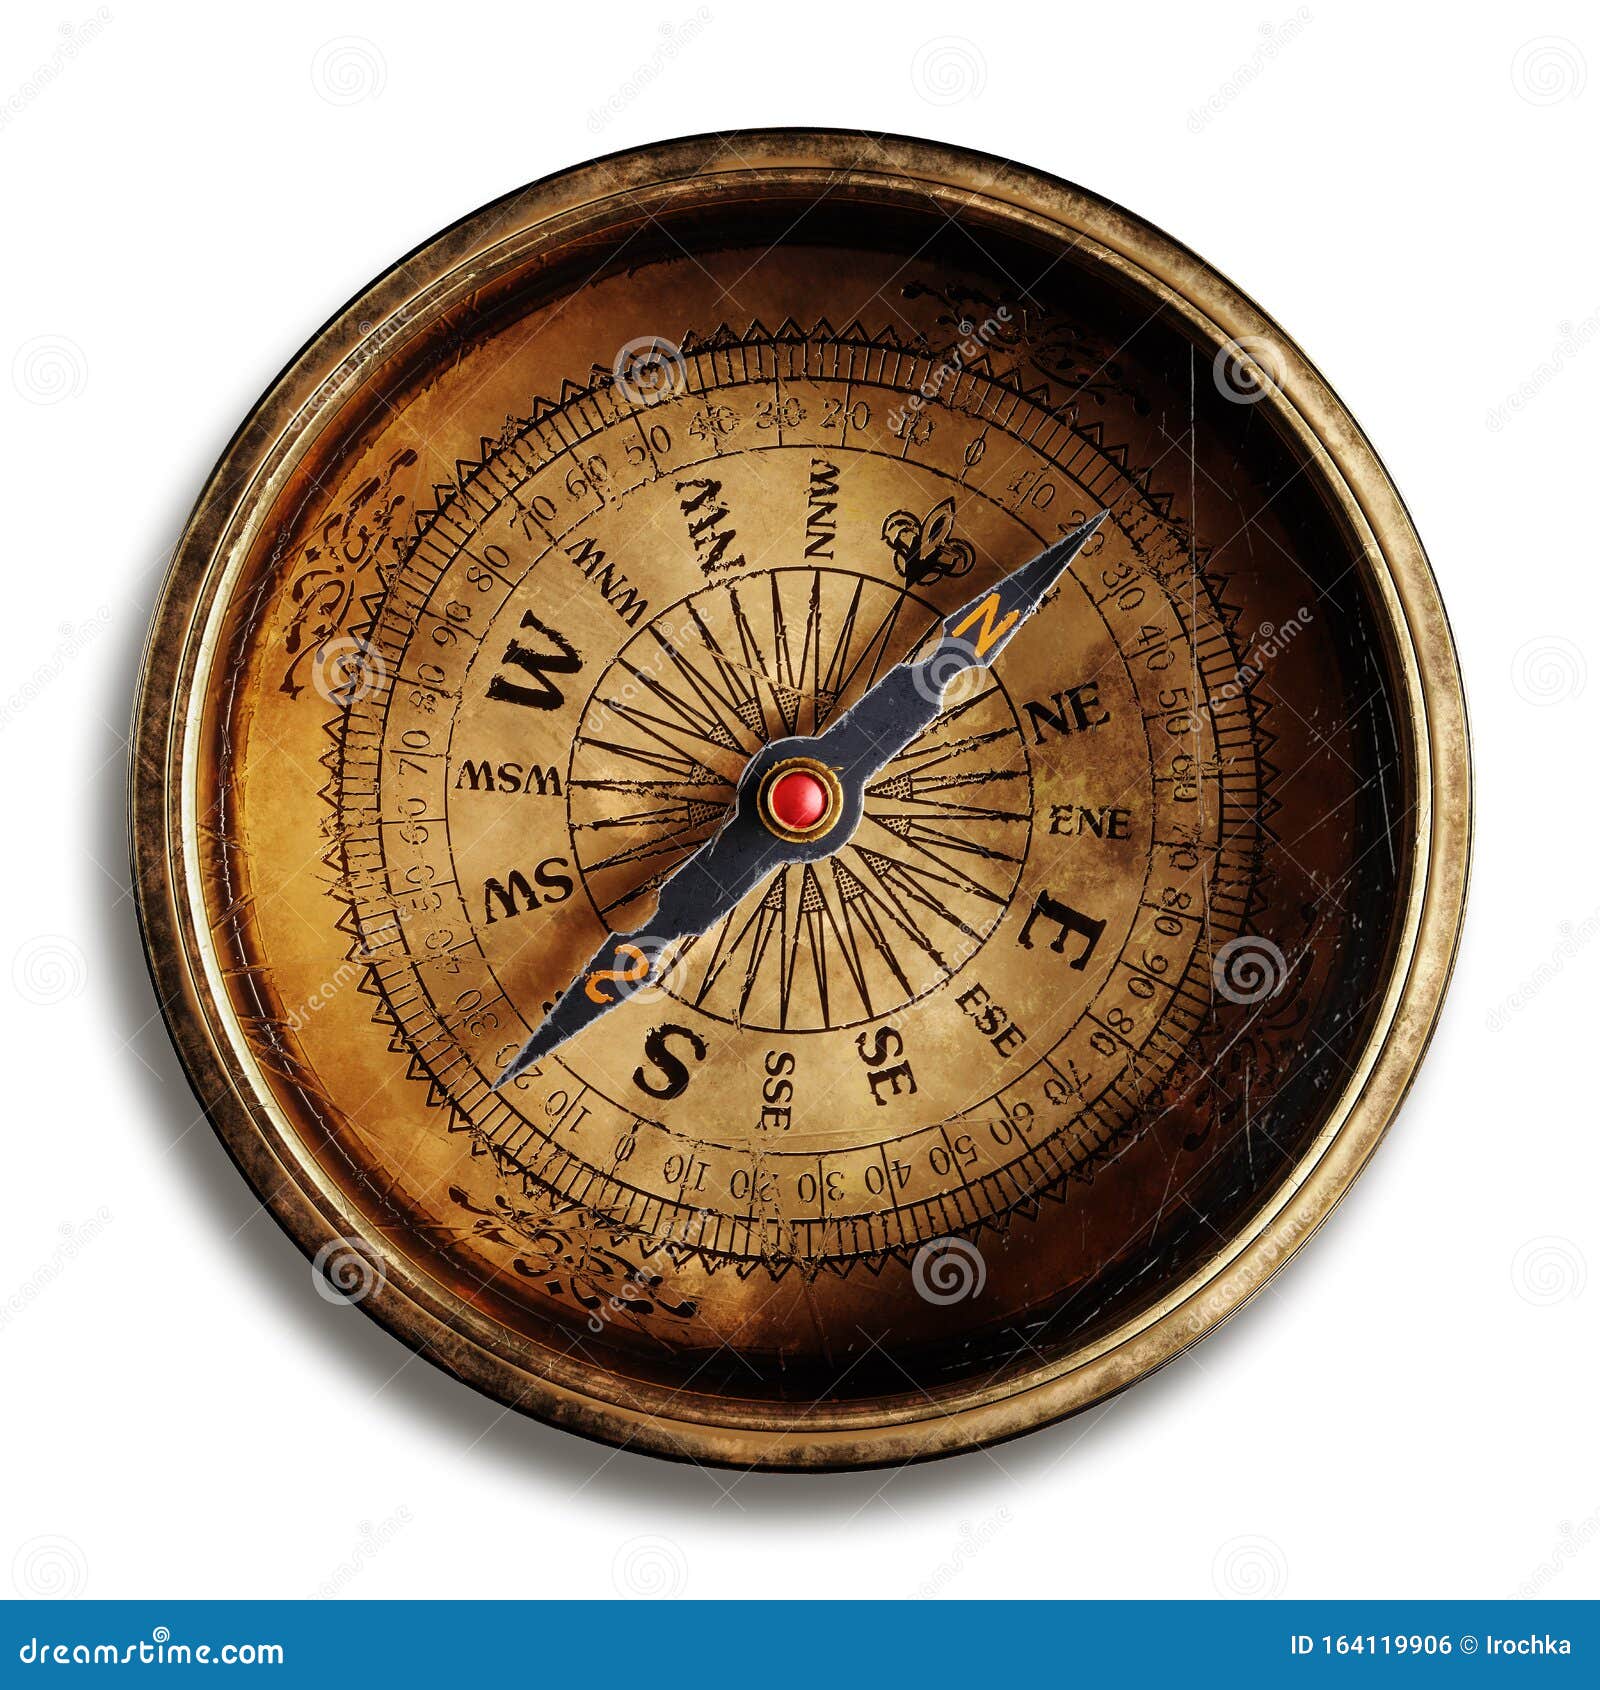 https://thumbs.dreamstime.com/z/vintage-brass-compass-isolated-black-background-d-rendering-164119906.jpg